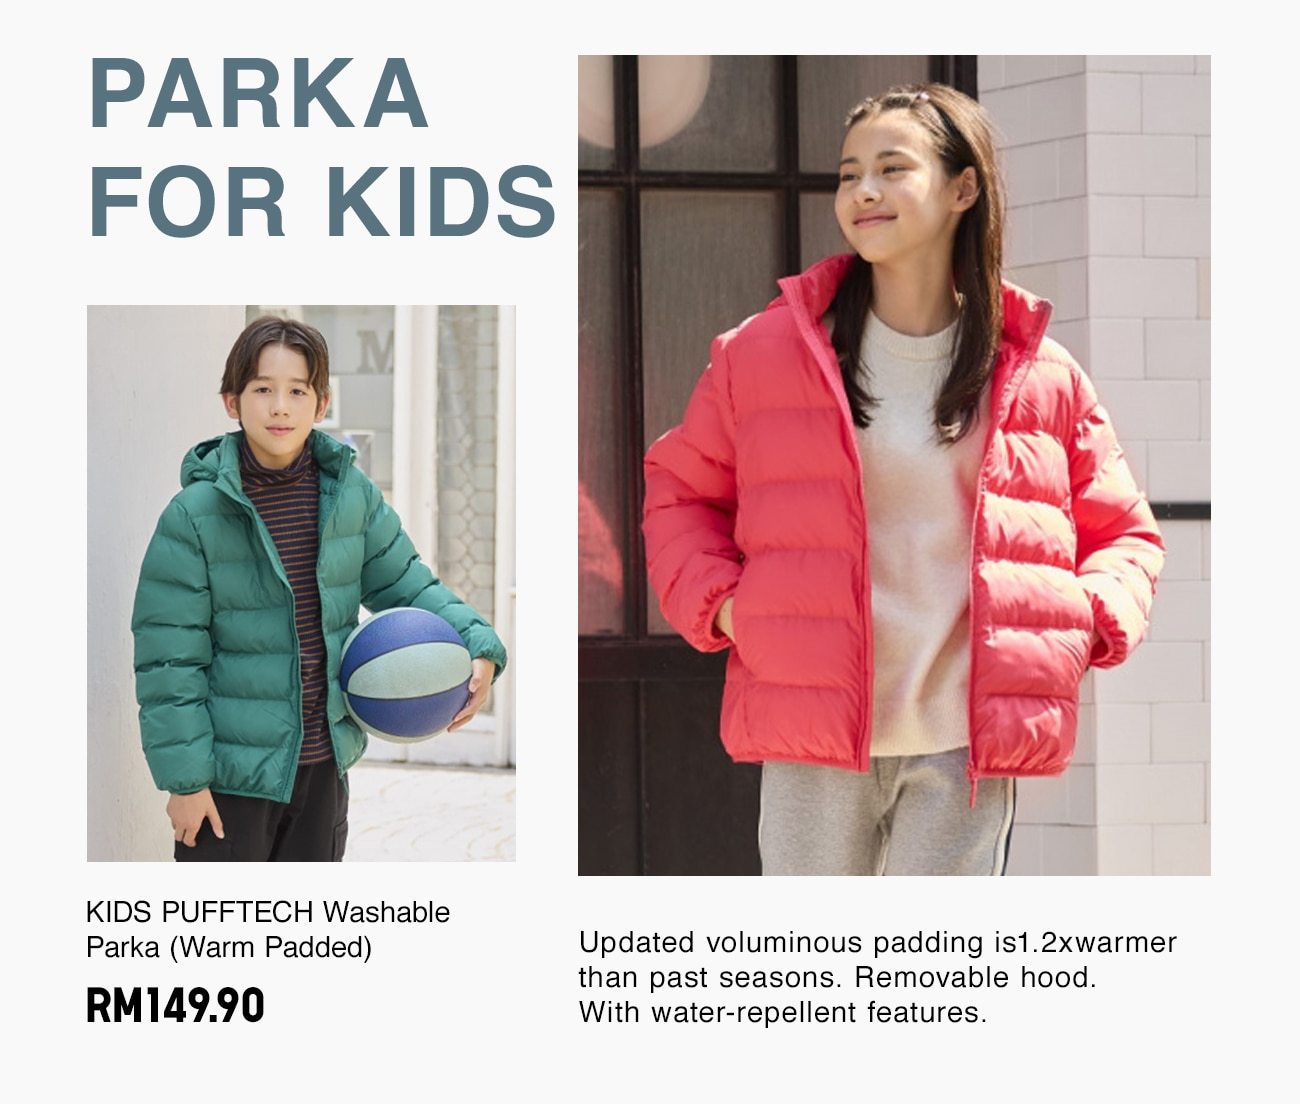 KIDS PUFFTECH Washable Parka (Warm Padded)